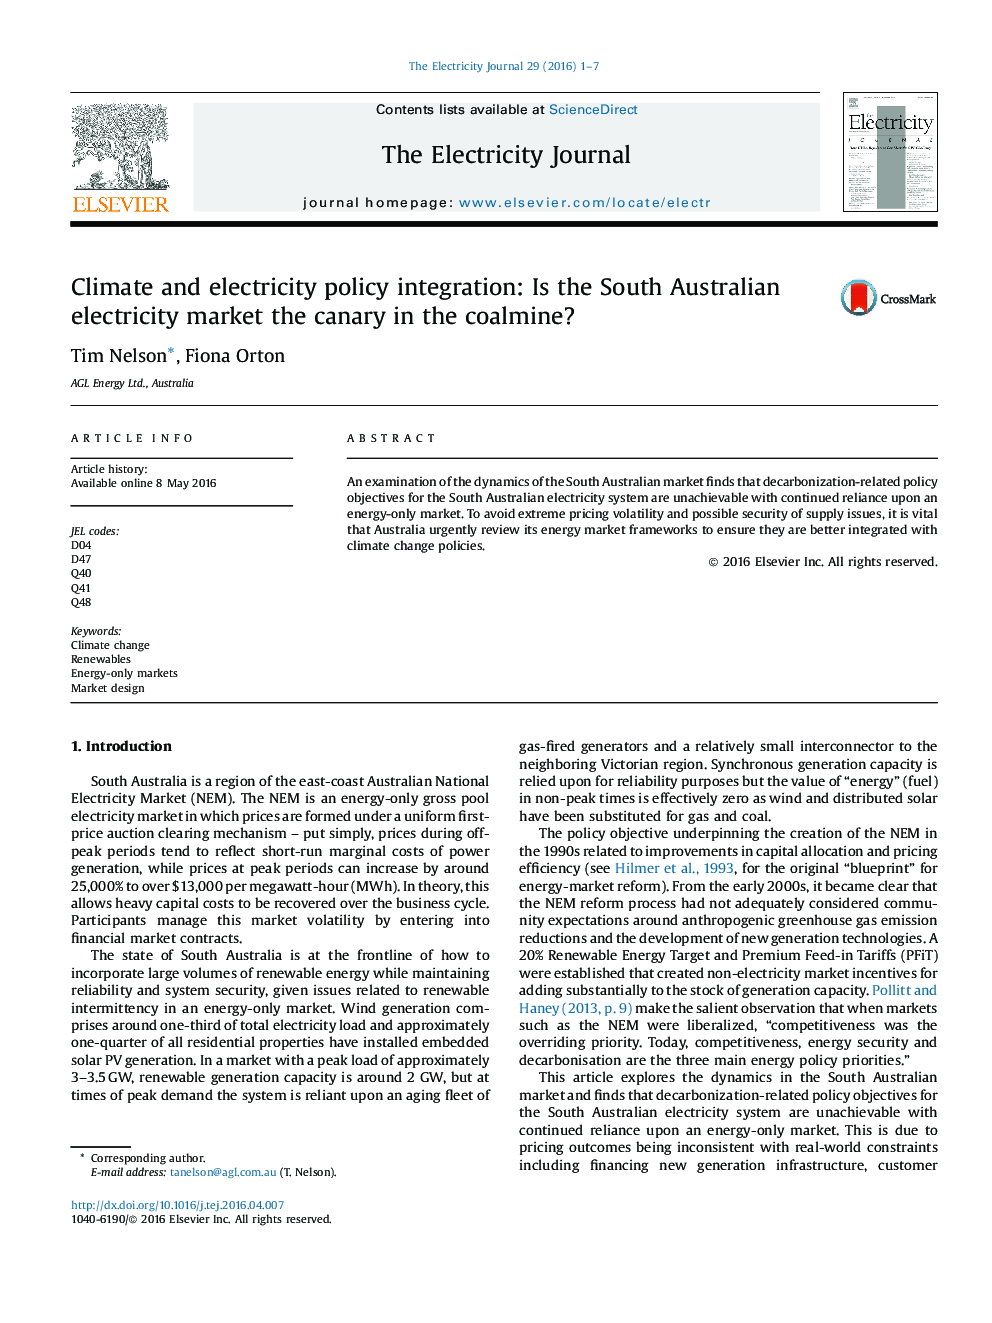 Climate and electricity policy integration: Is the South Australian electricity market the canary in the coalmine?